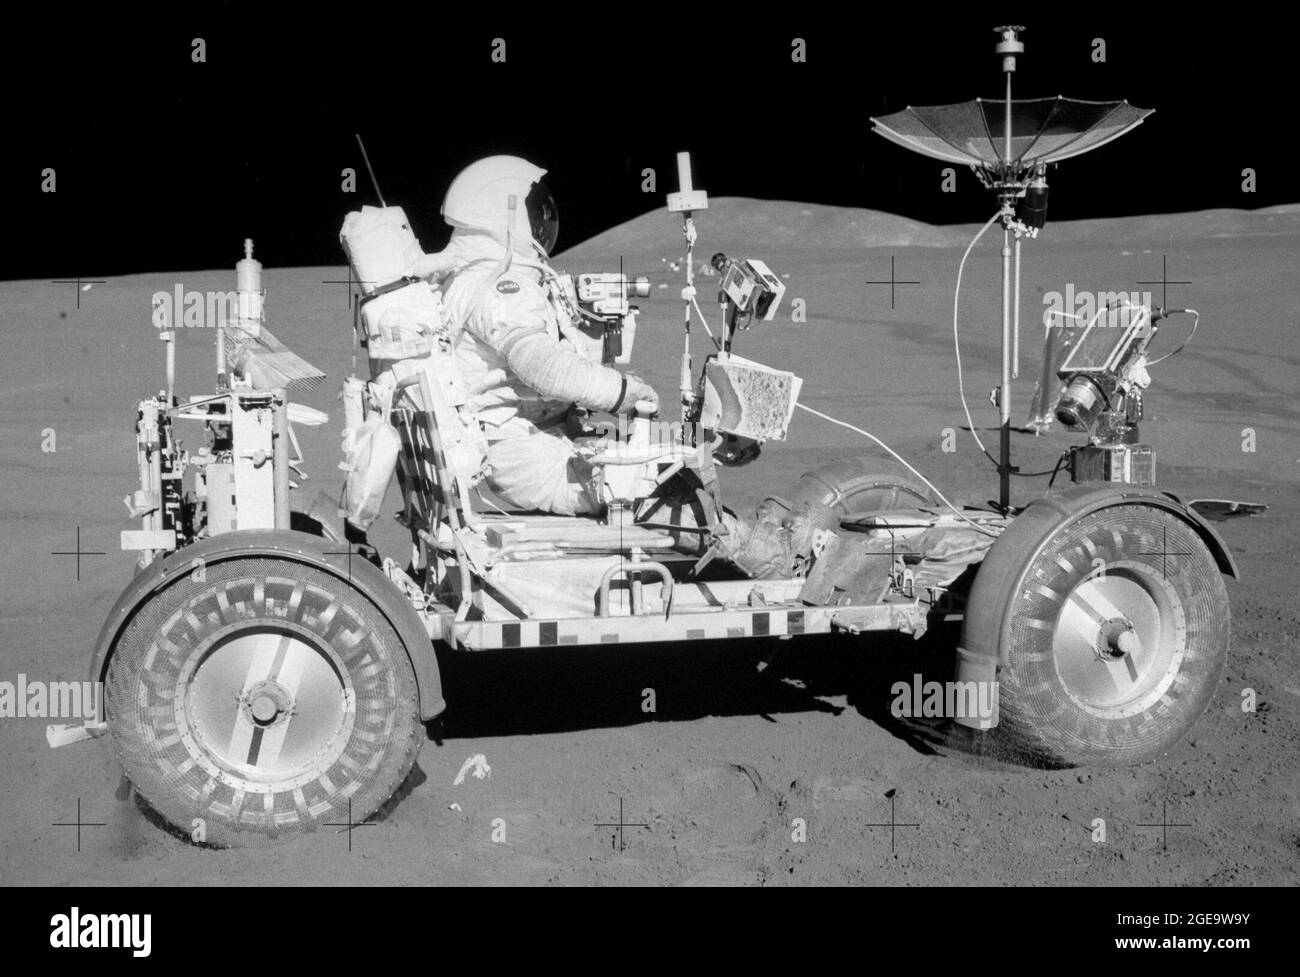 This photograph was taken during the Apollo 15 mission on the lunar surface. Astronaut David R. Scott waits in the Lunar Roving Vehicle (LRV) for astronaut James Irwin for the return trip to the Lunar Module, Falcon, with rocks and soil collected near the Hadley-Apernine landing site. The Apollo 15 was the first mission to use the LRV. Powered by battery, the lightweight electric car greatly increased the range of mobility and productivity on the scientific traverses for astronauts. It weighed 462 pounds (77 pounds on the Moon) and could carry two suited astronauts, their gear and cameras, and Stock Photo